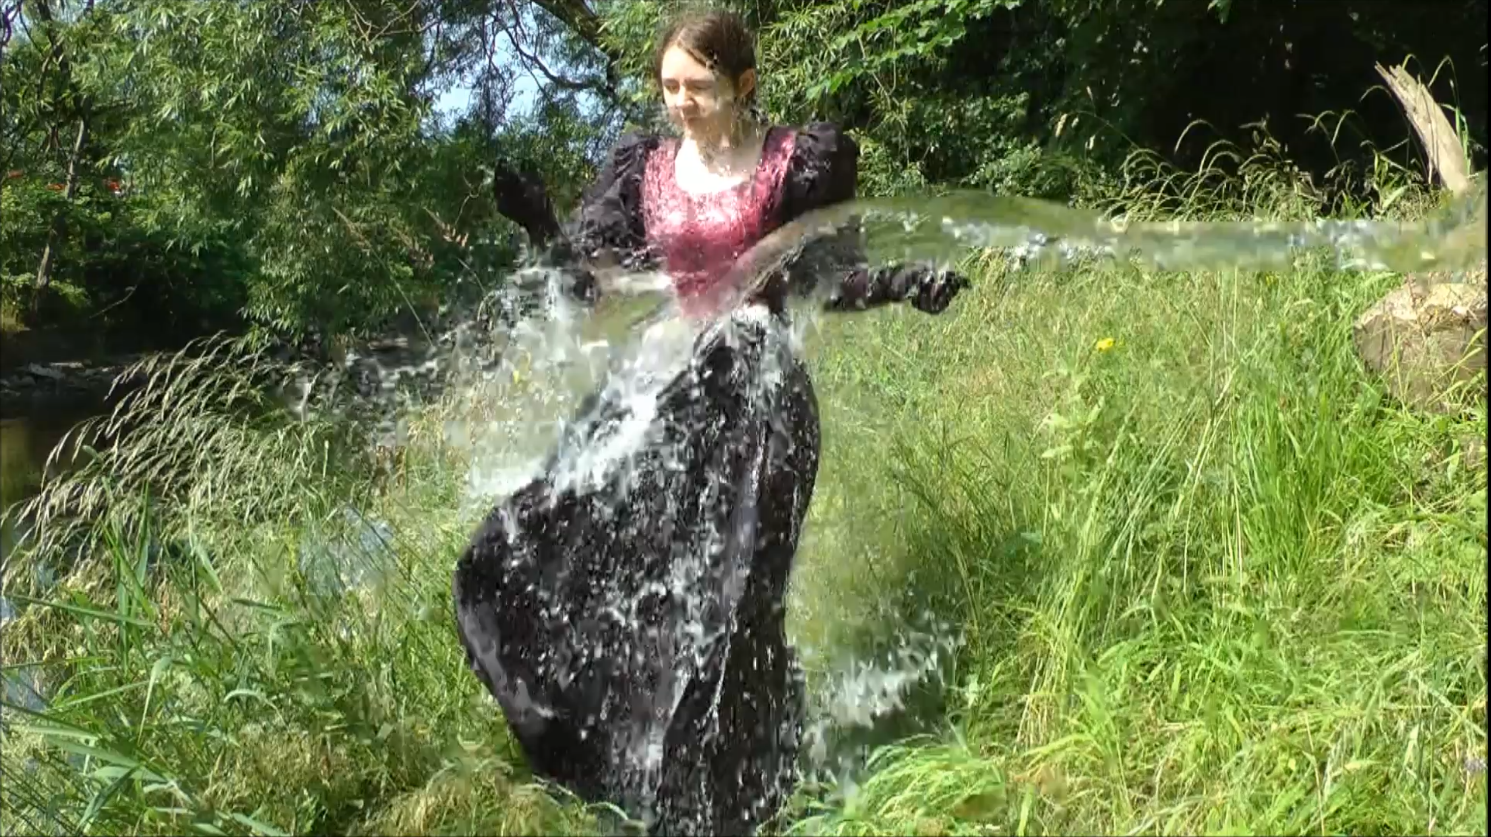  video still of Chastity in a beautiful floor length dress, taking a direct hit from a bucketful of water 